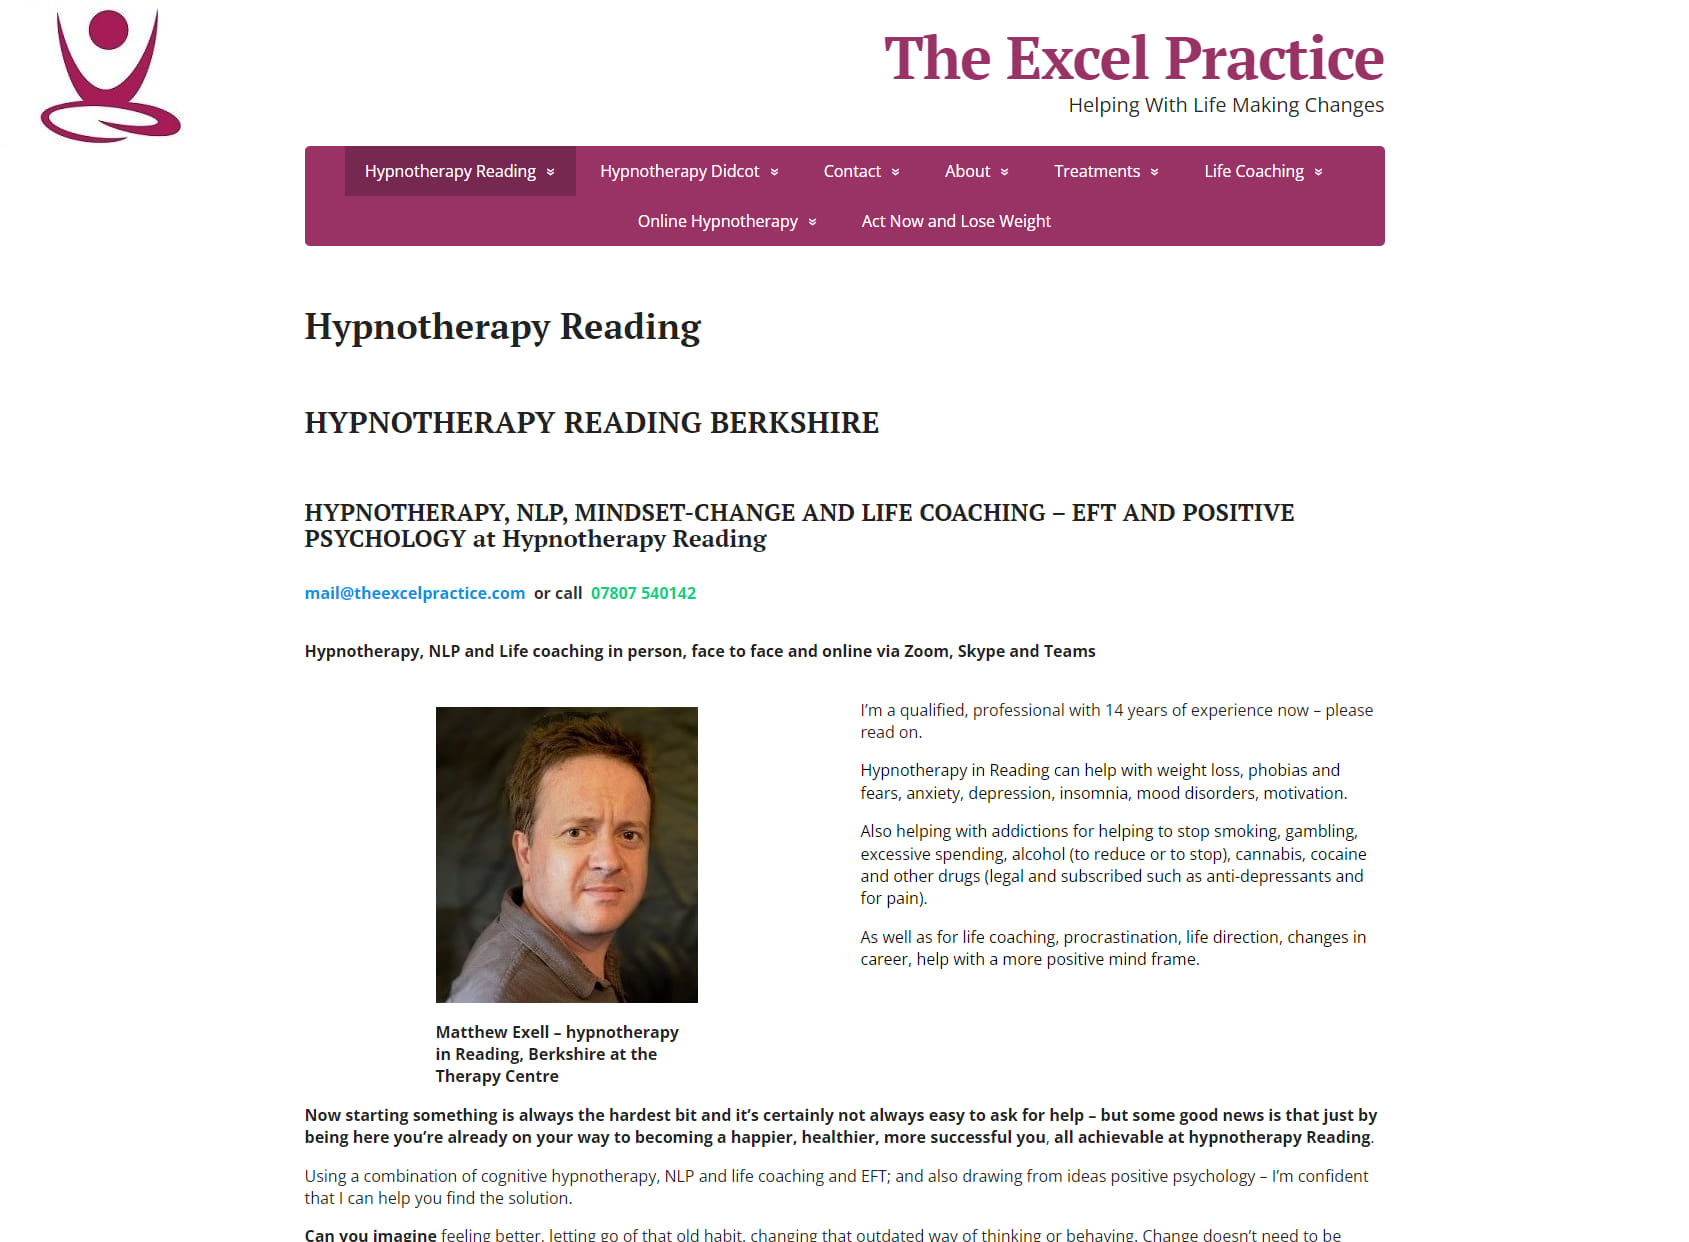 The Excel Practice - Reading, Berkshire Hypnotherapy